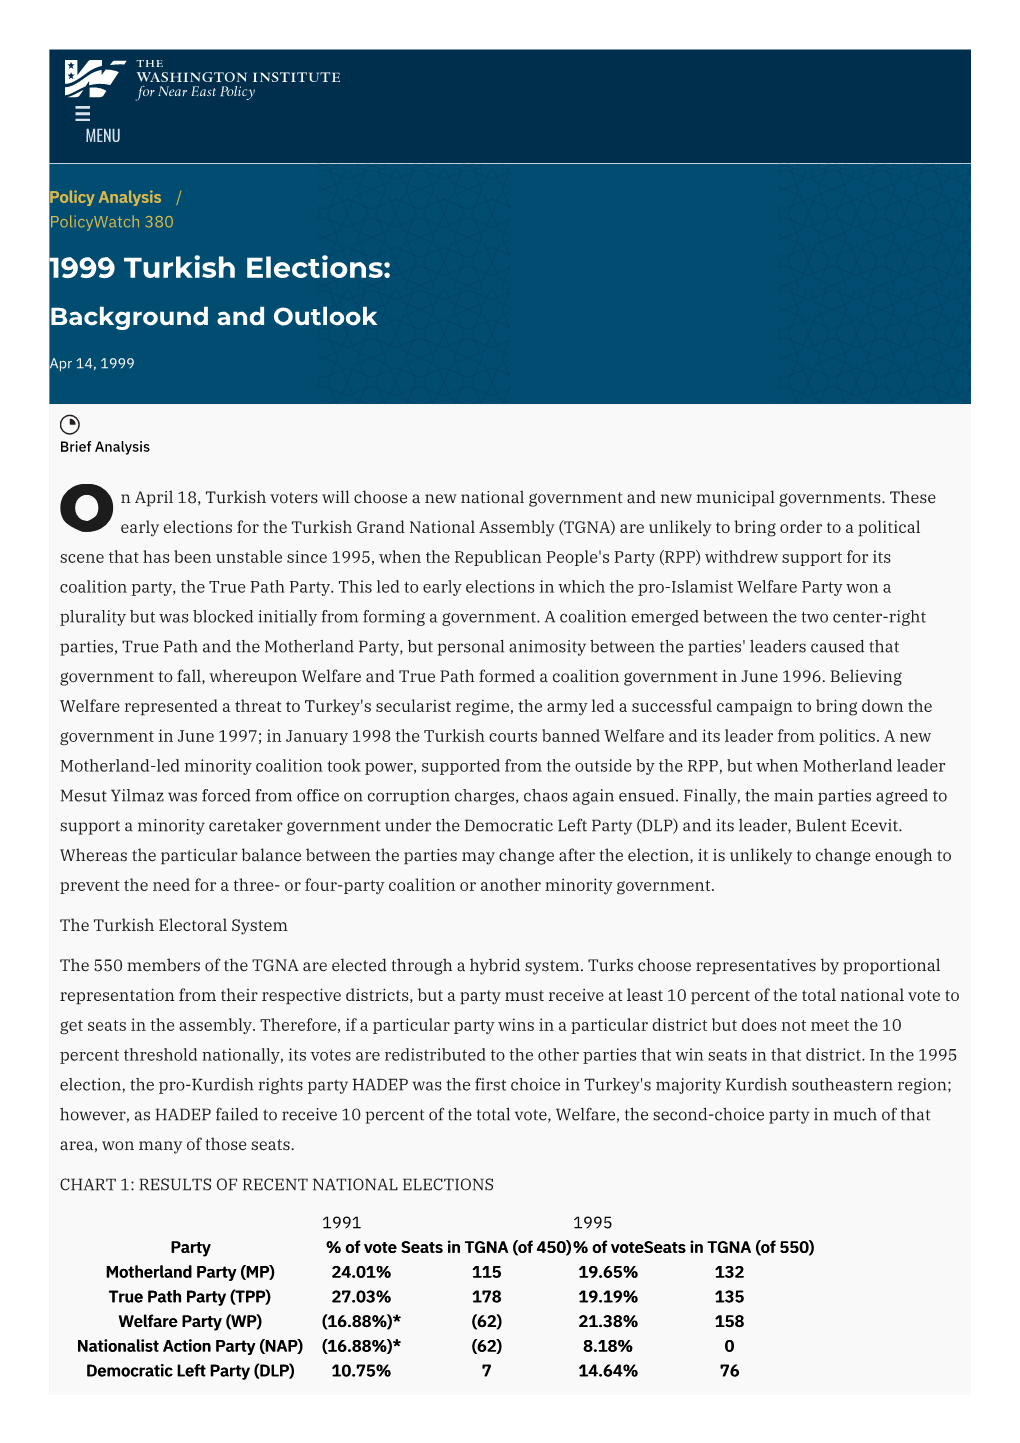 1999 Turkish Elections: Background and Outlook